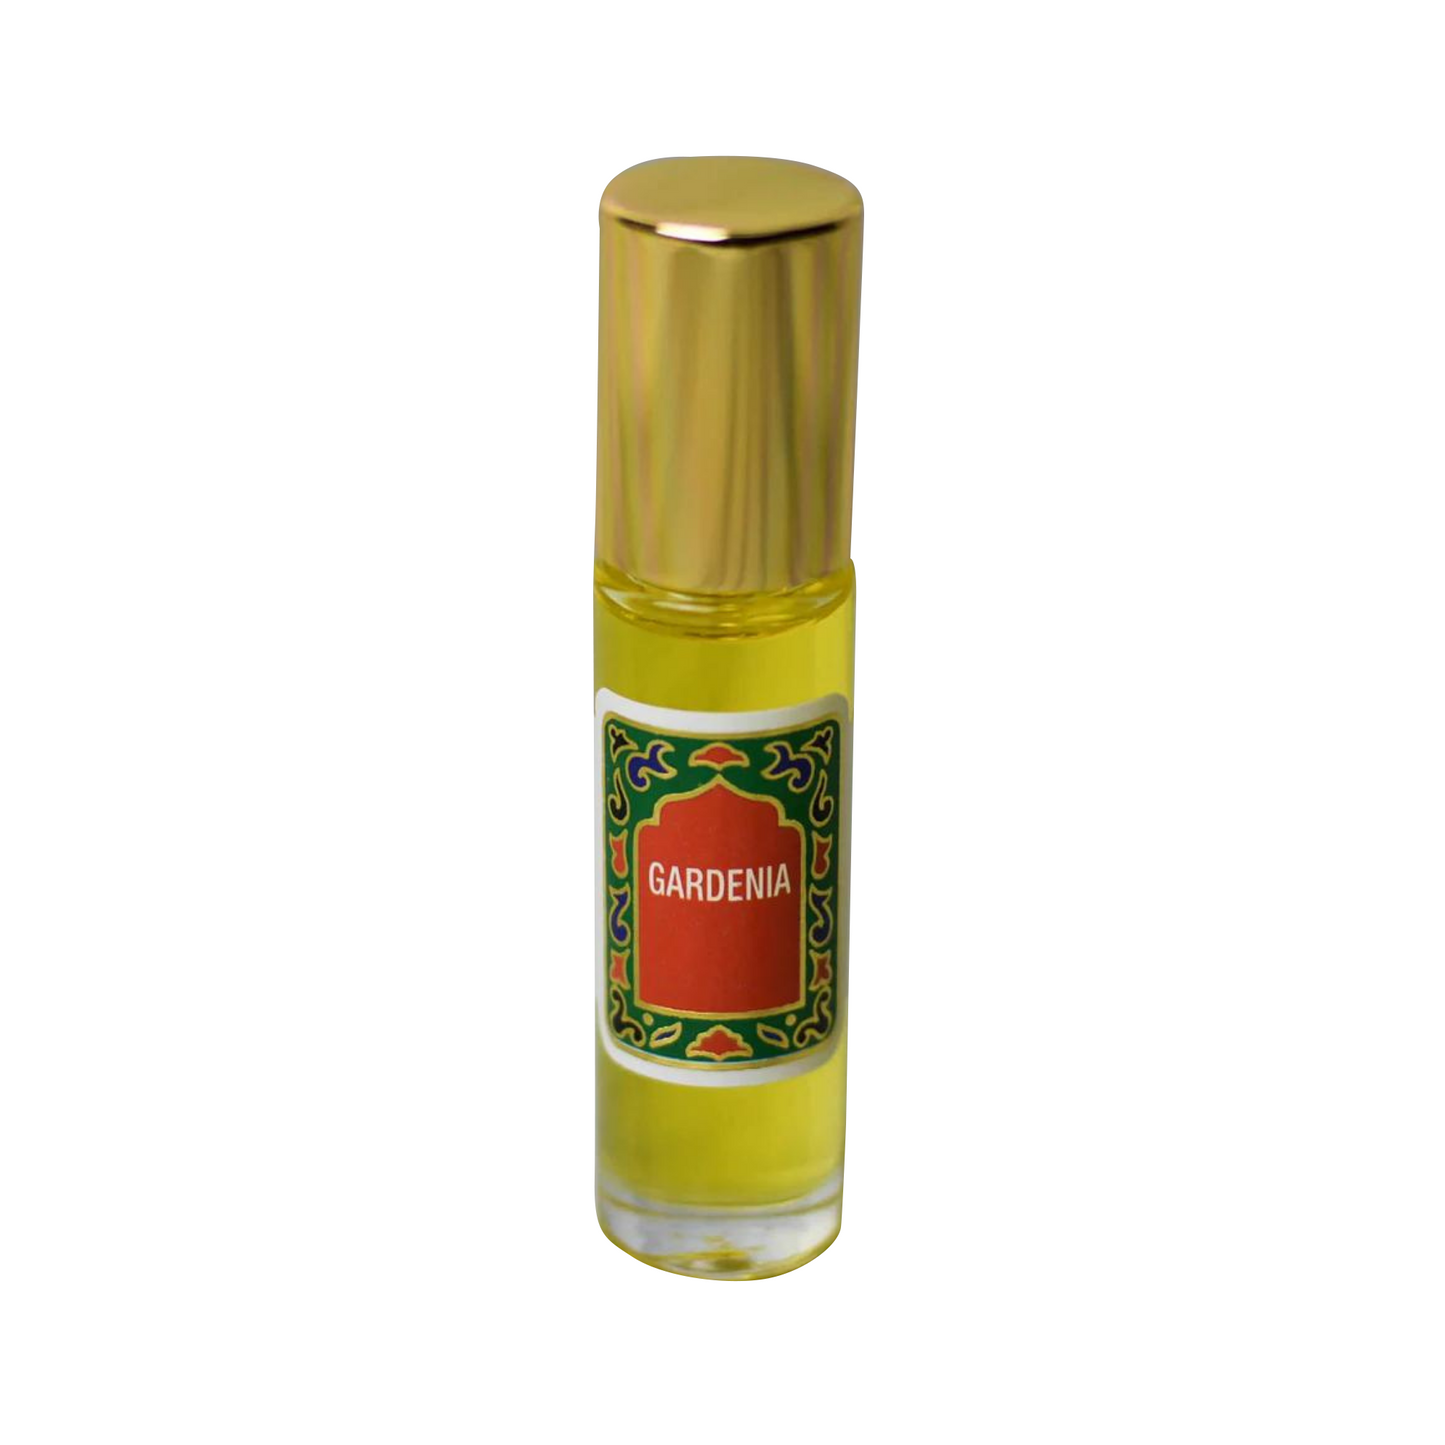 Primary image of Gardenia Fragrance Roll-On